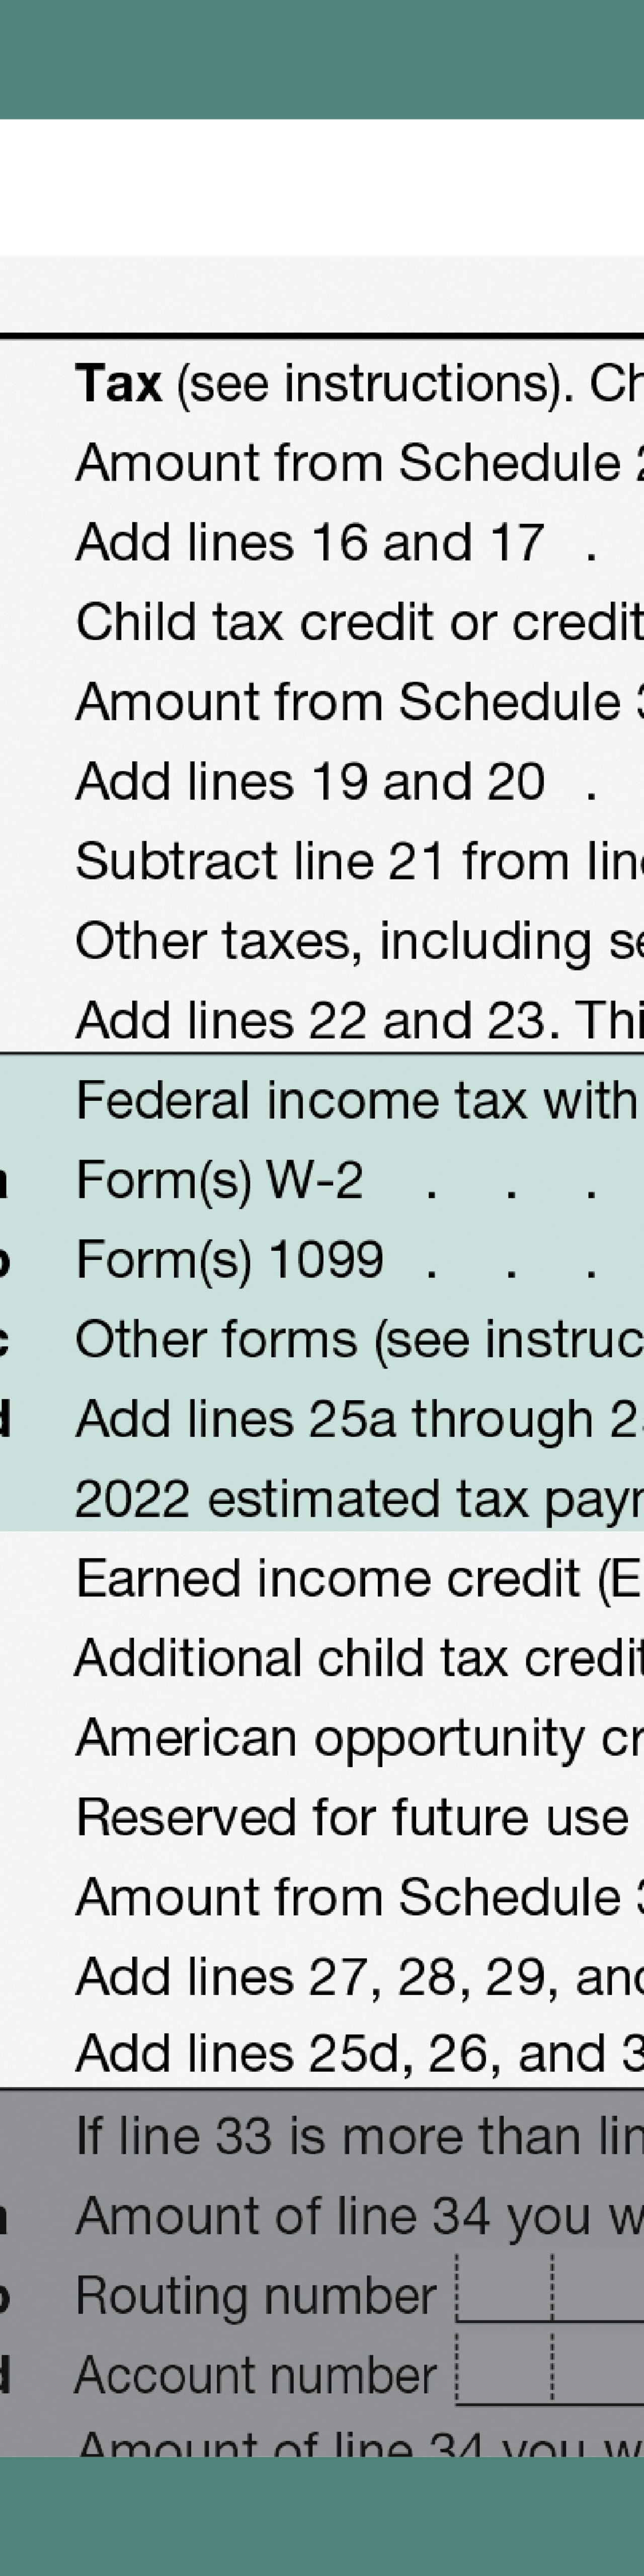 Taxes and credits, payments.